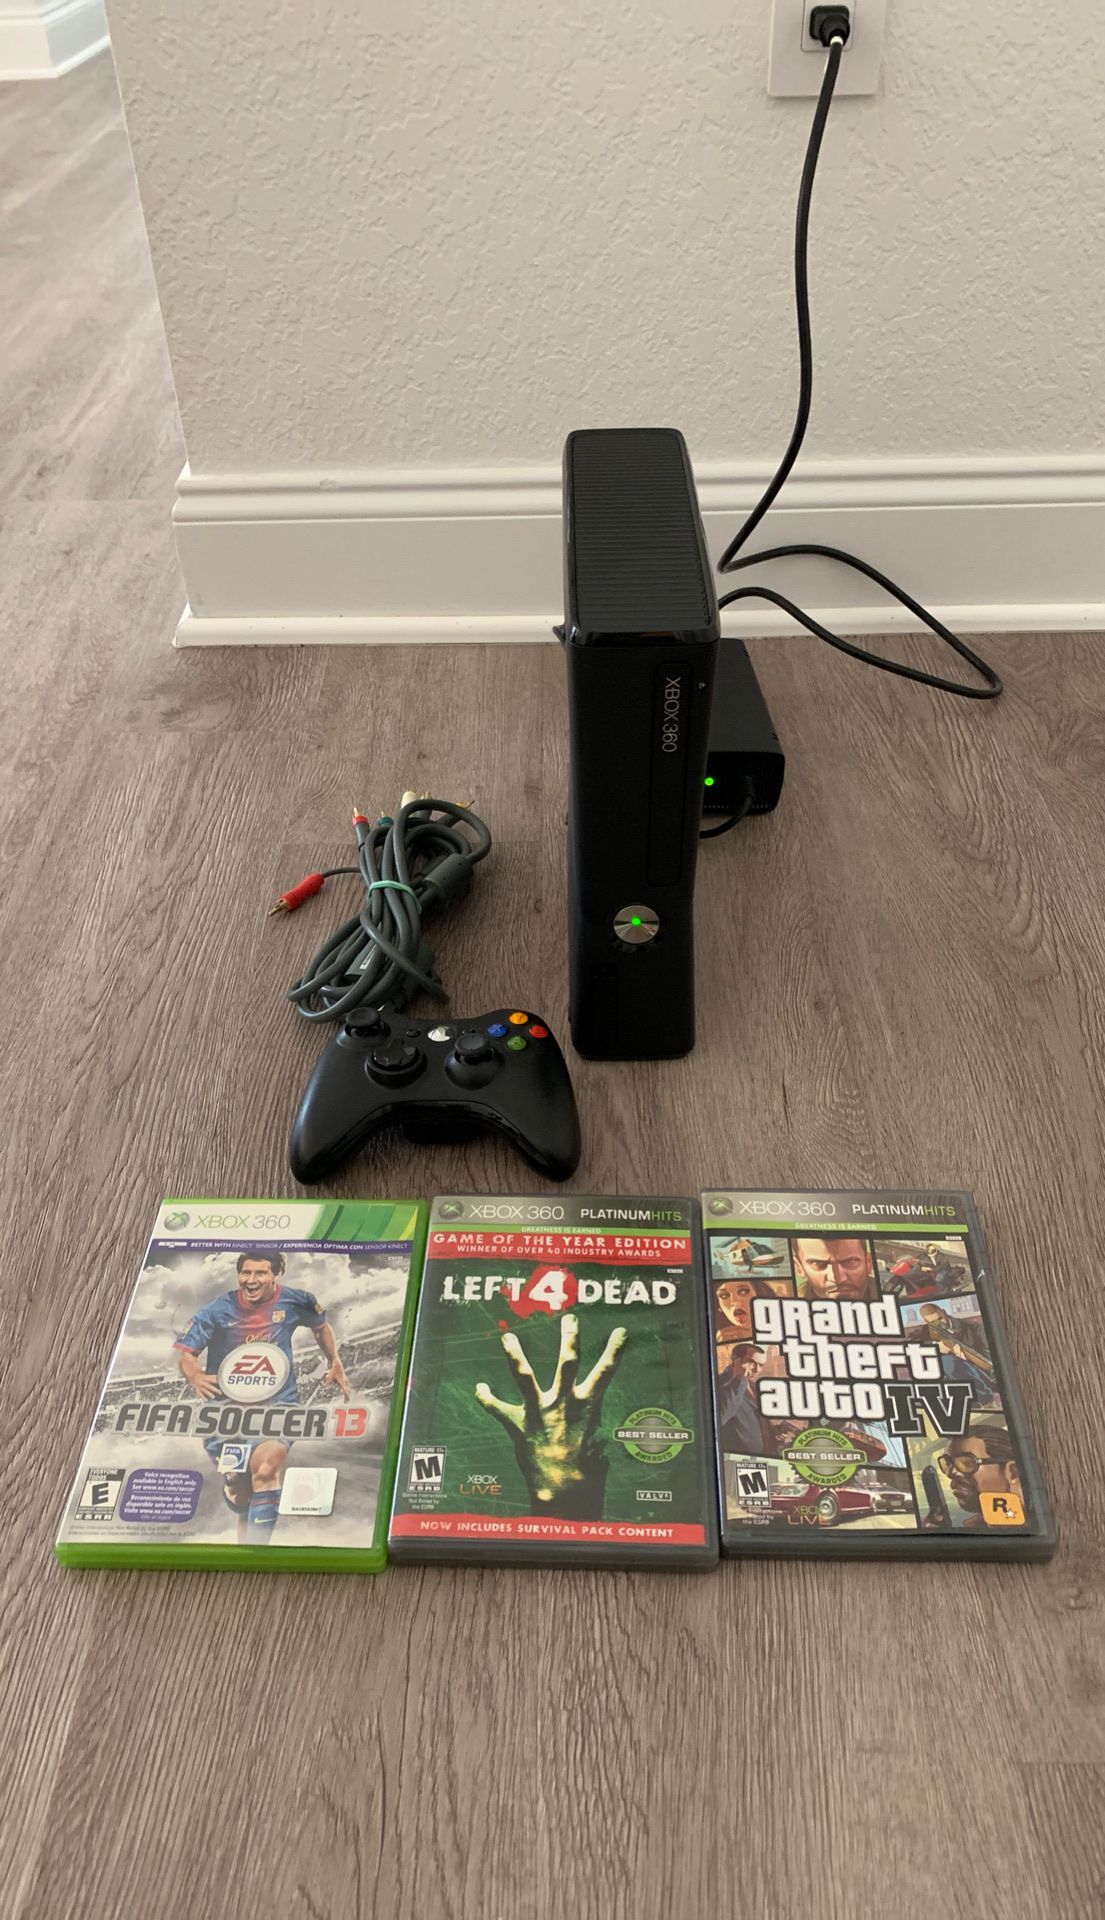 XBOX 360 w/ Cables, controllers, and 3 games